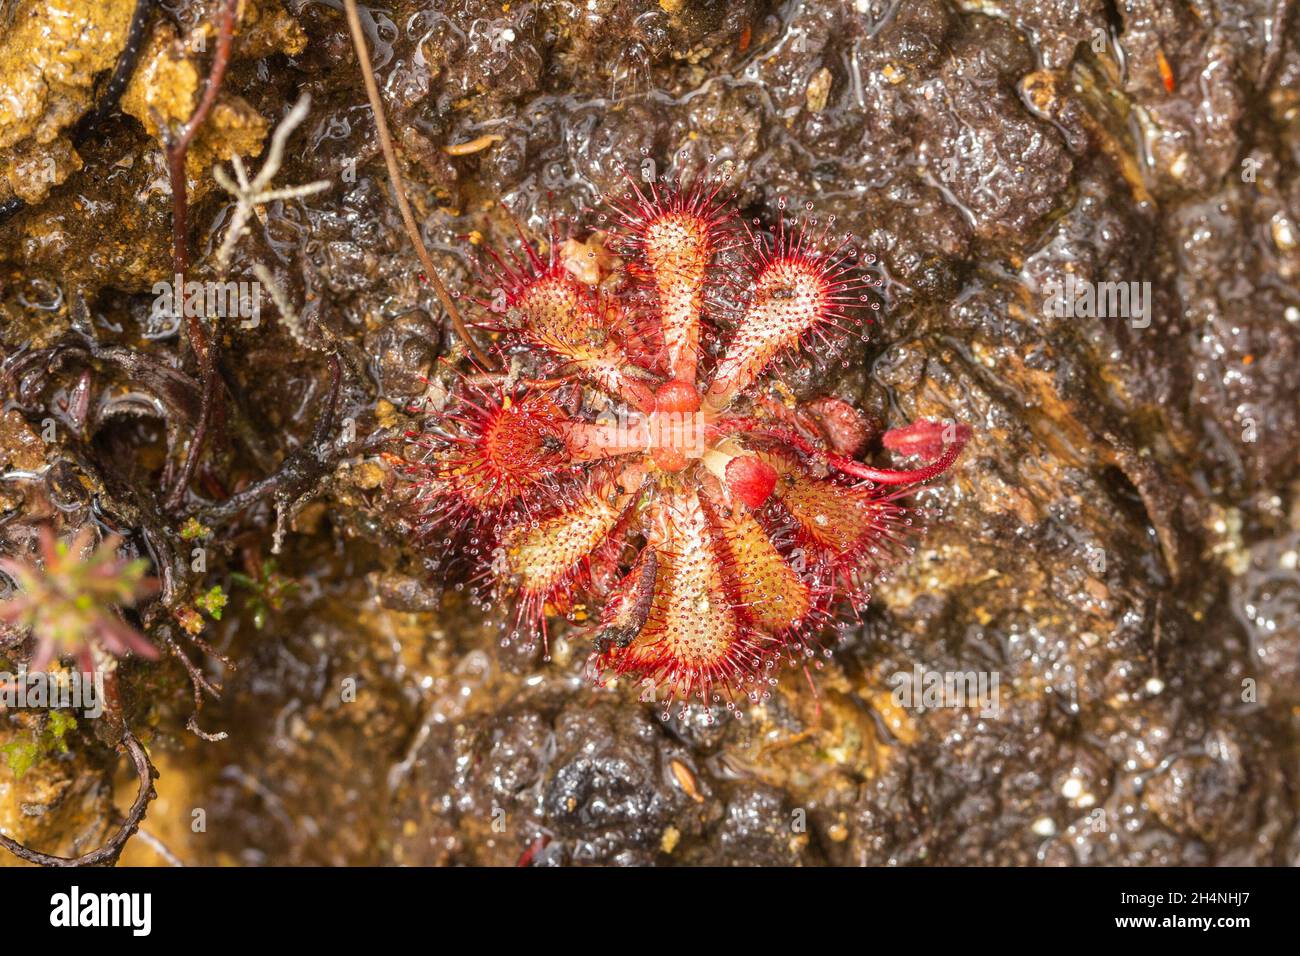 Single plant of Drosera natalensis in natural habitat seen close to Mossel Bay in the Western Cape of South Africa Stock Photo